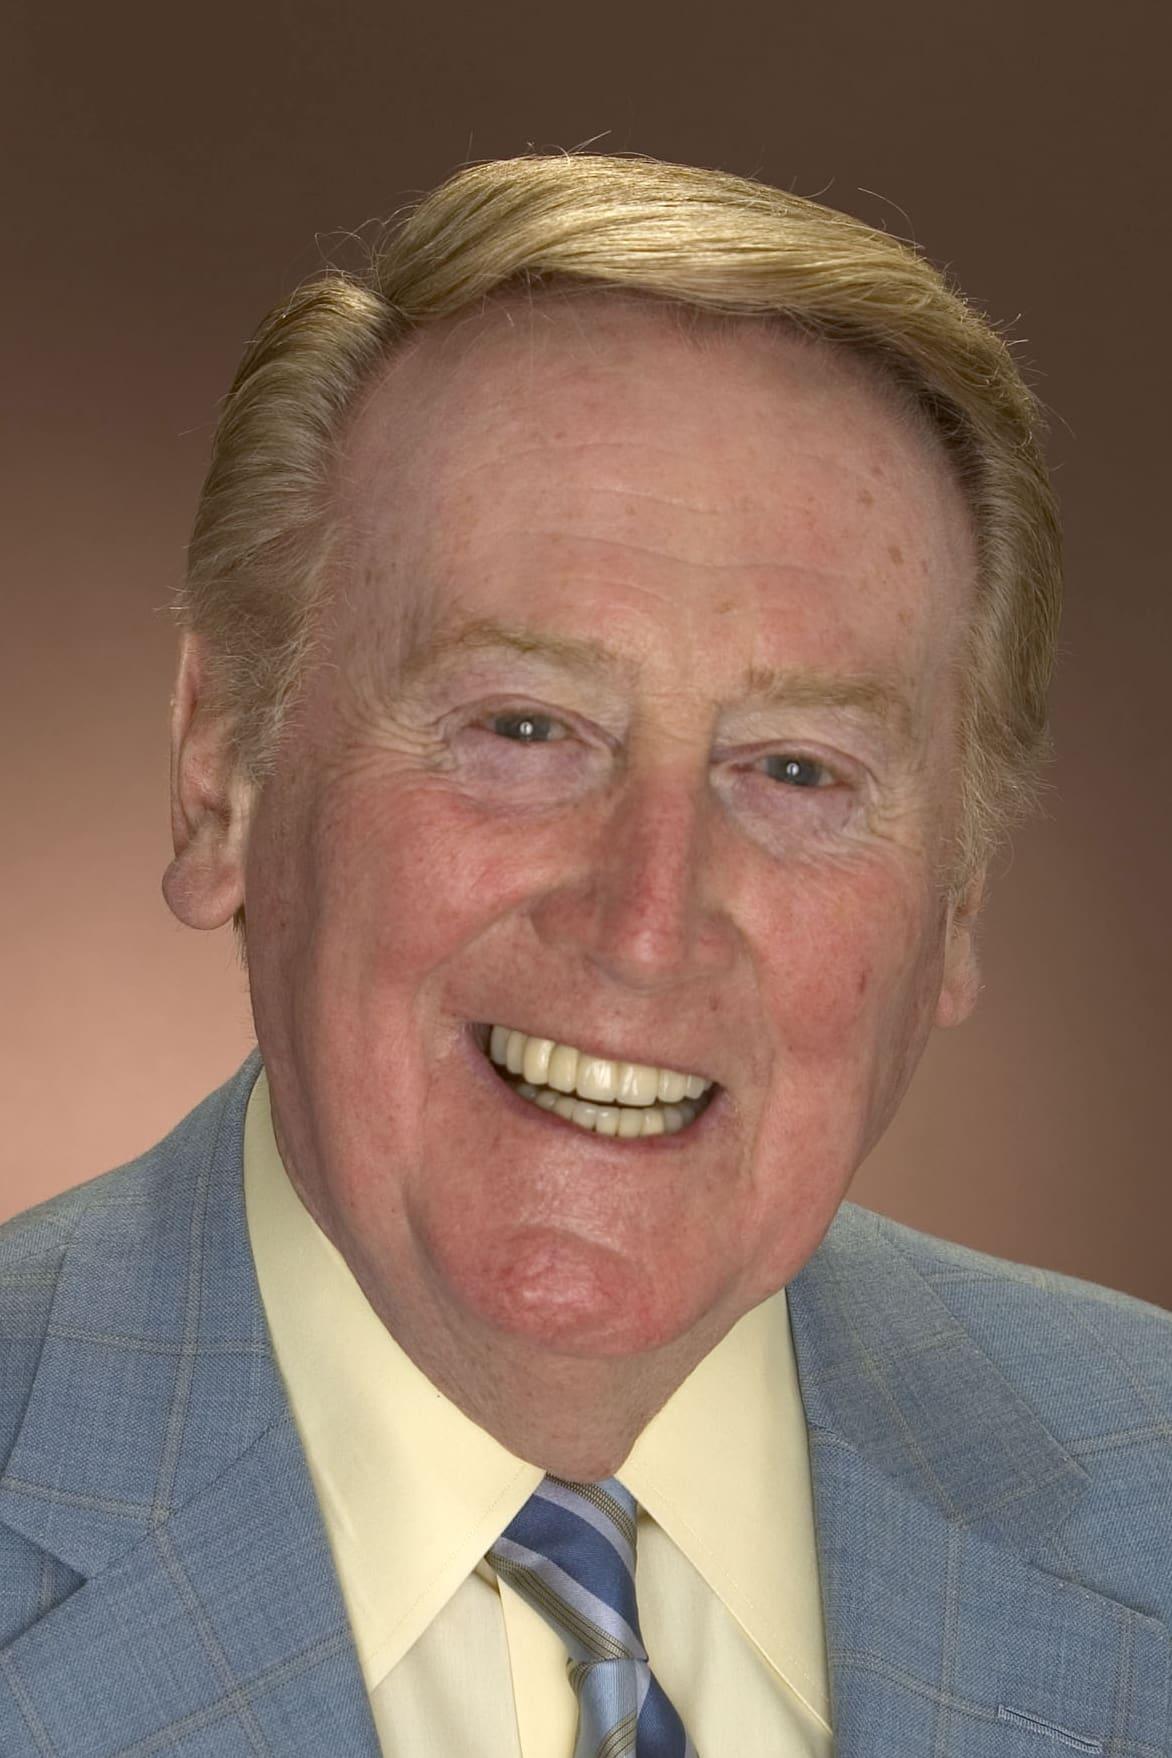 Vin Scully | Voice of the Dodgers (voice)